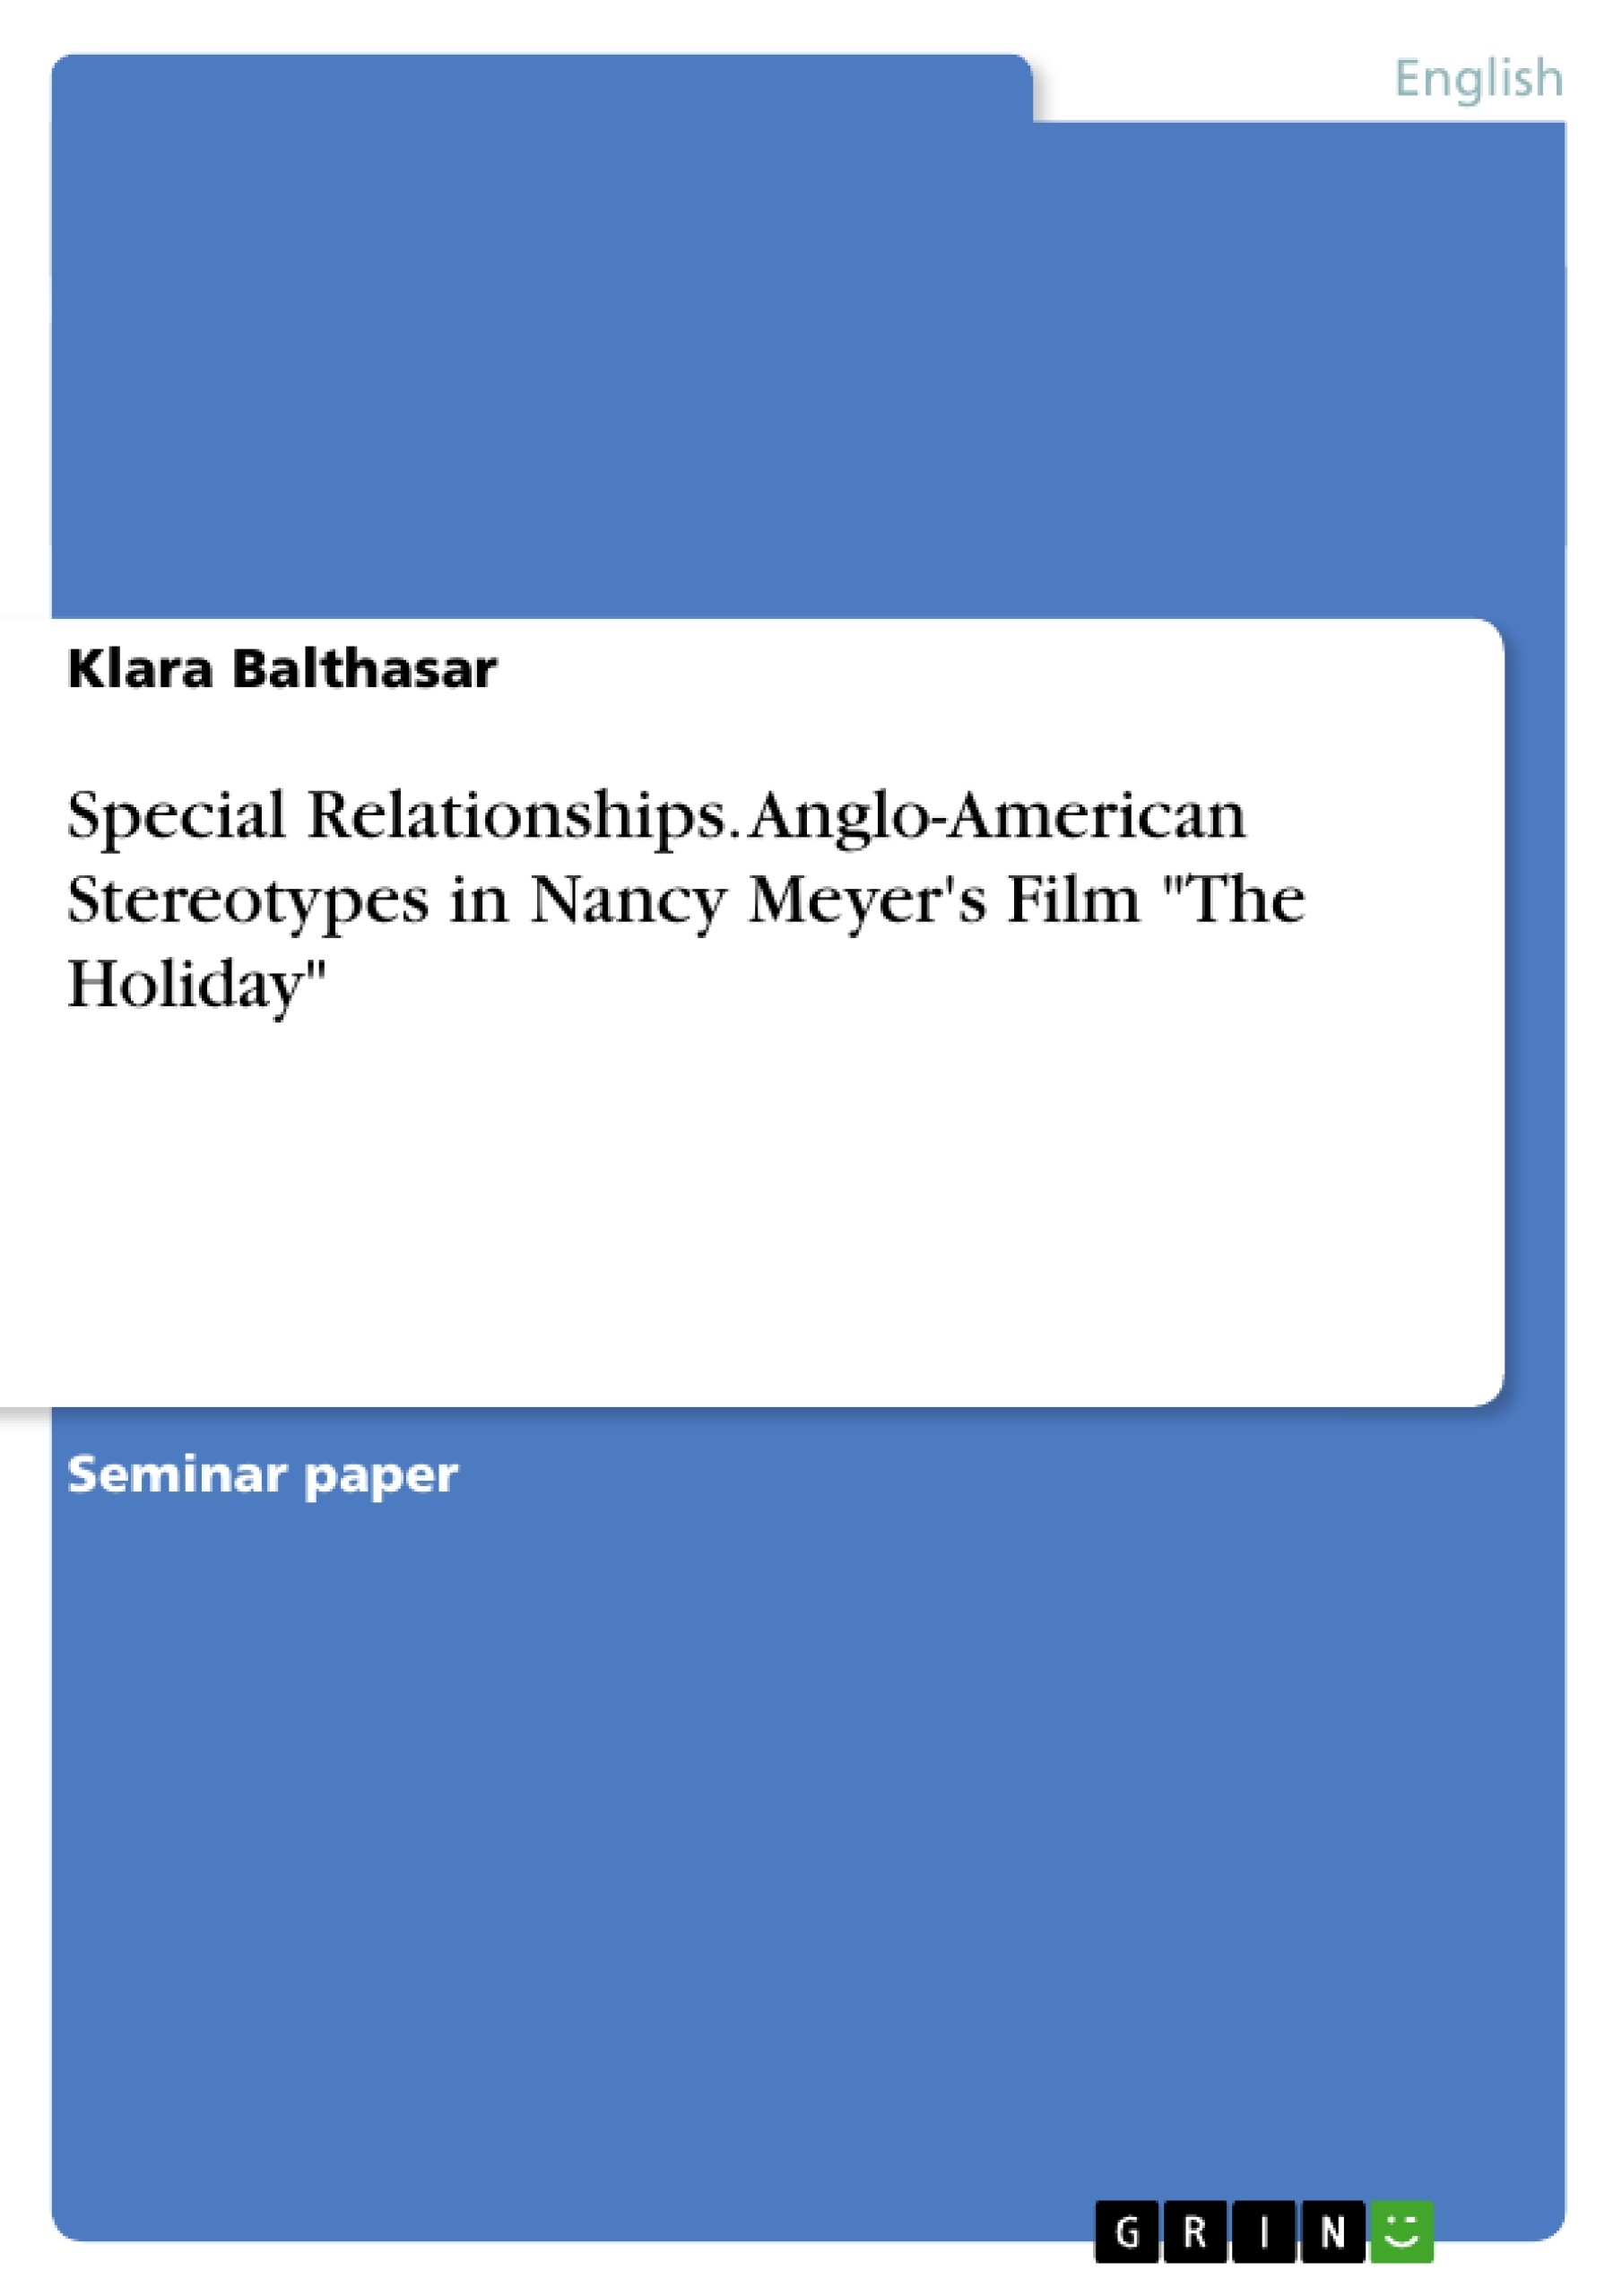 Title: Special Relationships. Anglo-American Stereotypes in Nancy Meyer's Film "The Holiday"